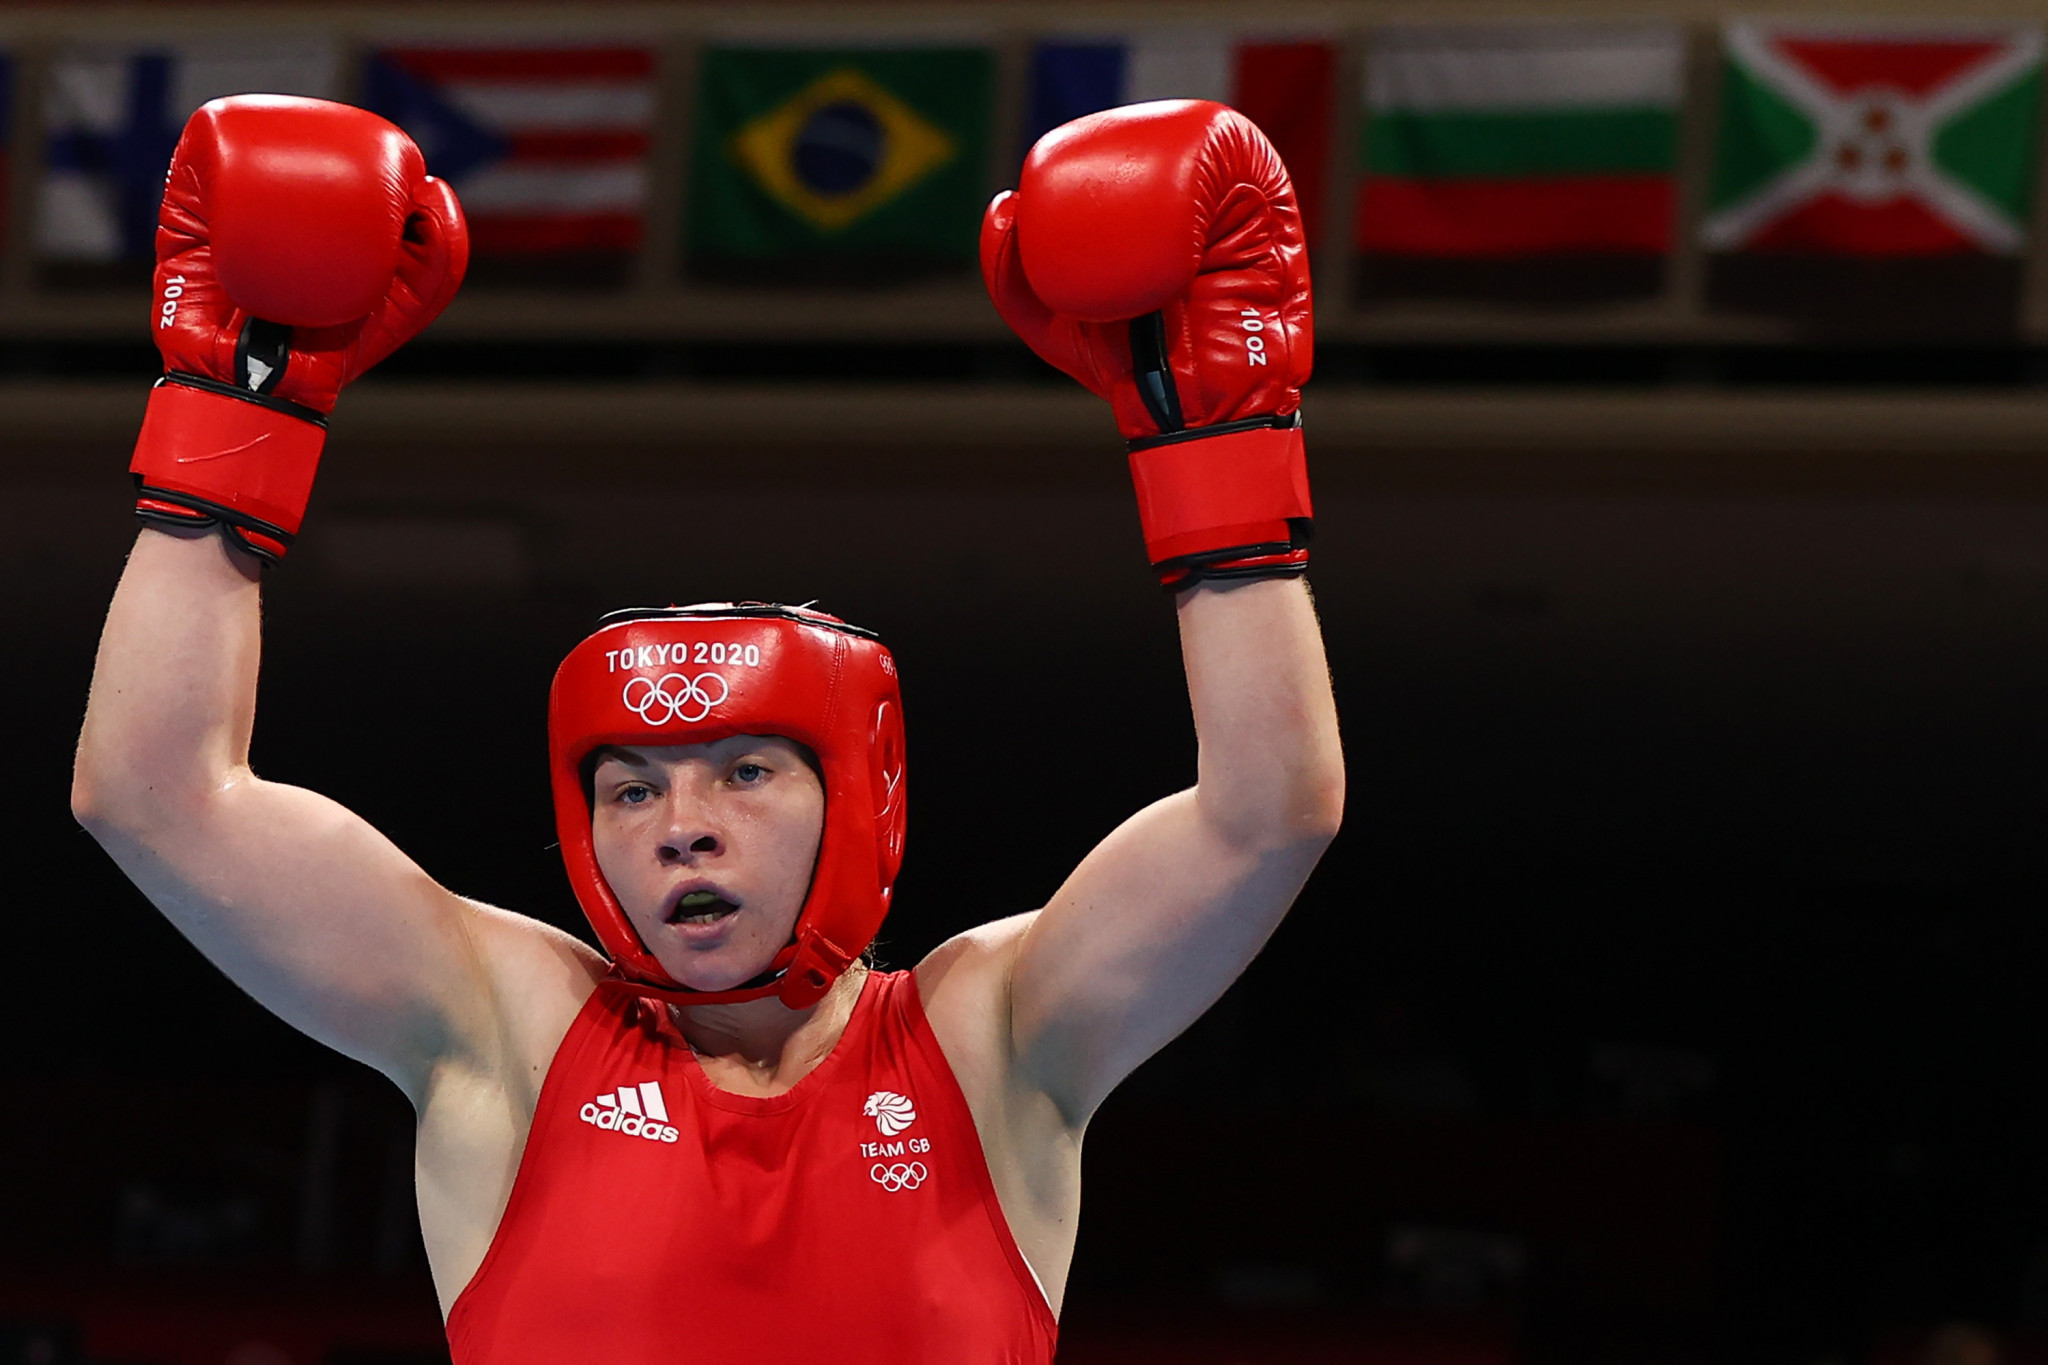 Welsh boxer Lauren Price won gold at Tokyo 2020 ©Getty Images